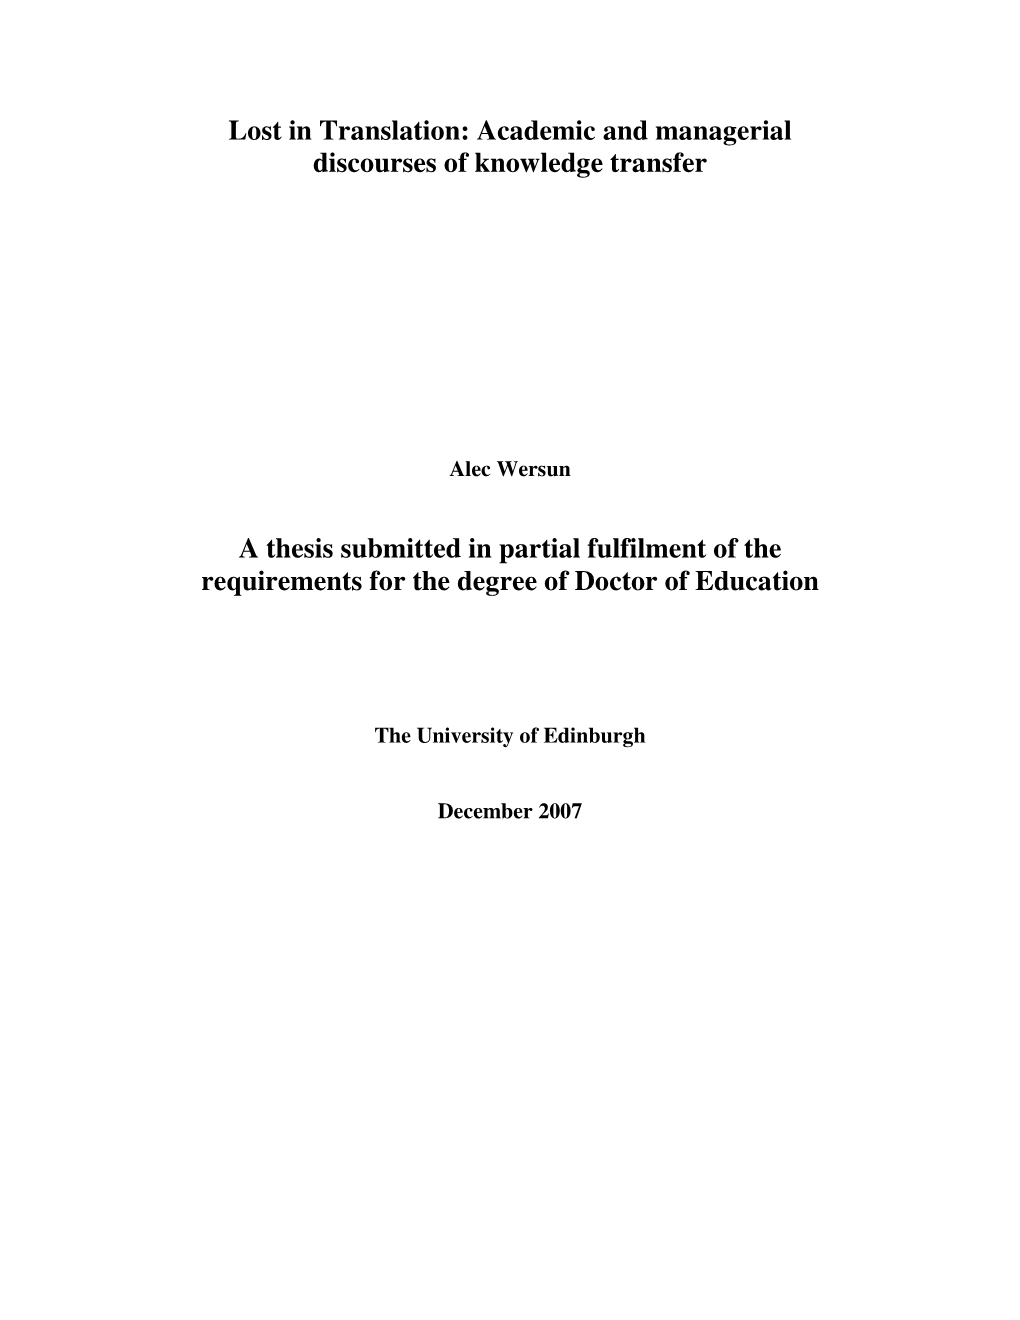 Academic and Managerial Discourses of Knowledge Transfer